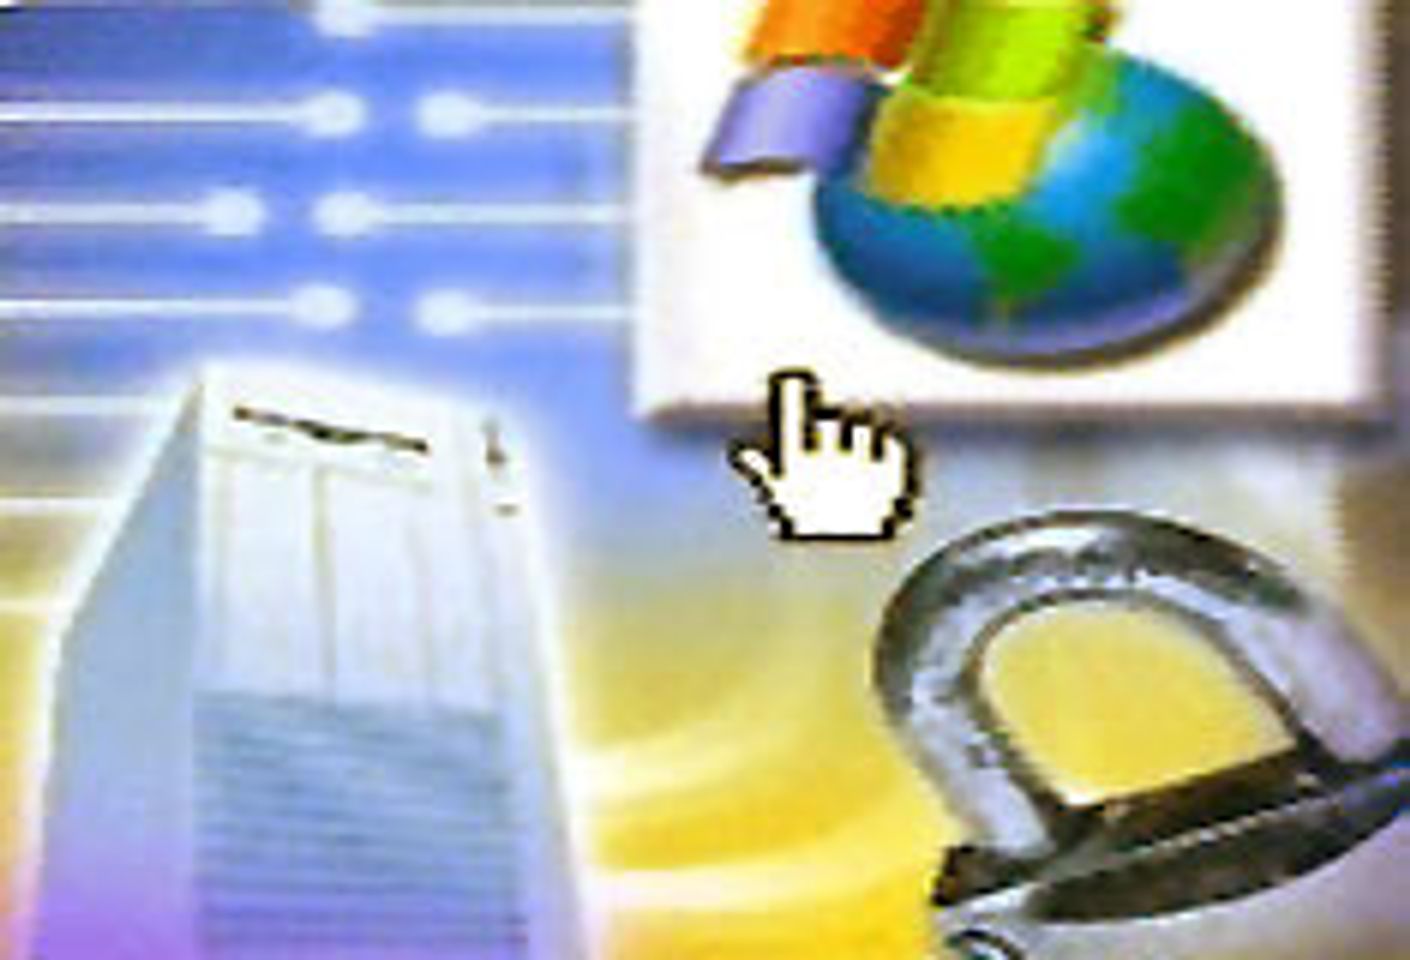 Microsoft "National Security Risk": Science, Security Experts